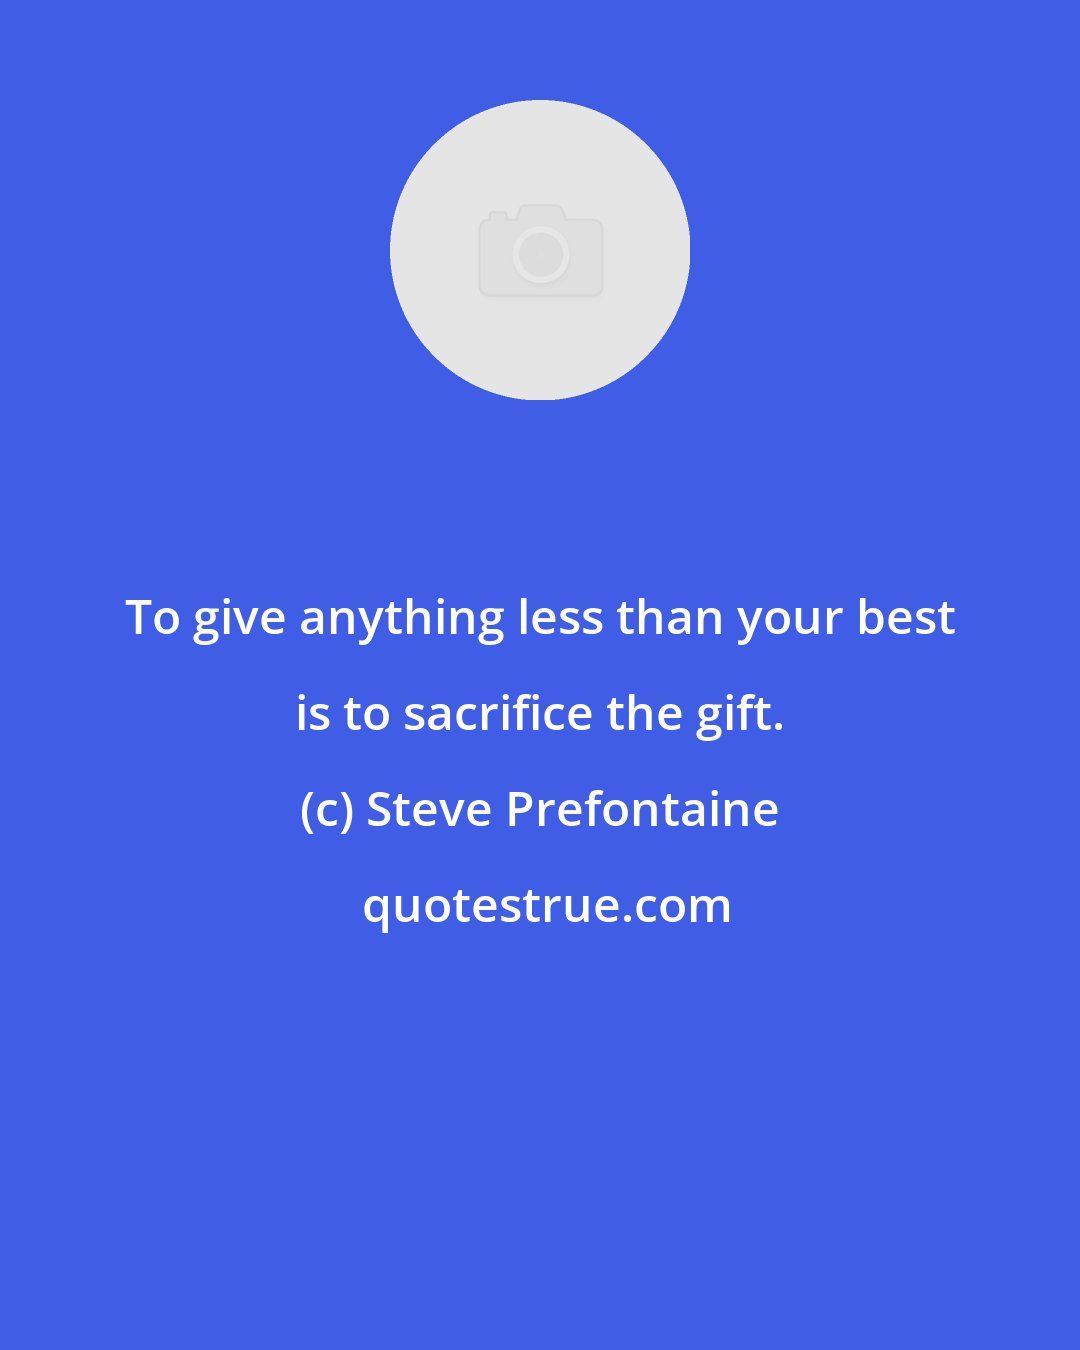 Steve Prefontaine: To give anything less than your best is to sacrifice the gift.